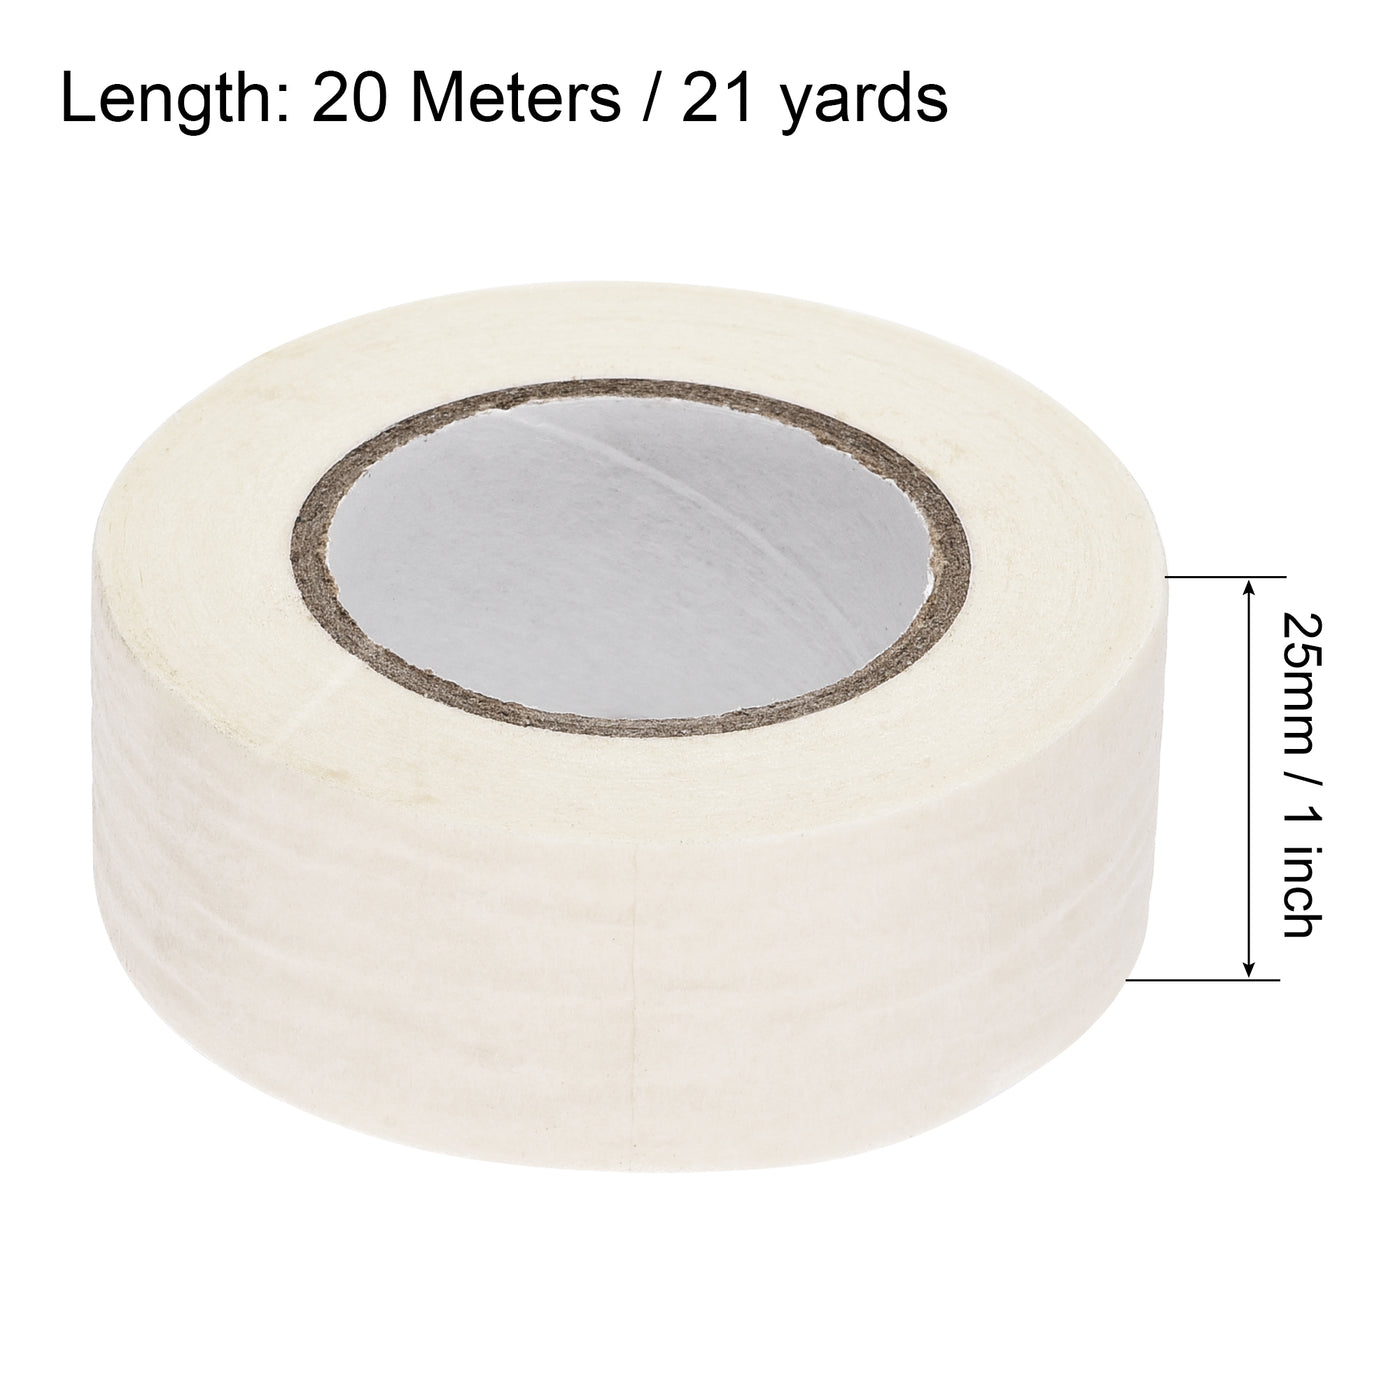 uxcell Uxcell 3Pcs 25mm 1 inch Wide 20m 21 Yards Masking Tape Painters Tape Rolls White